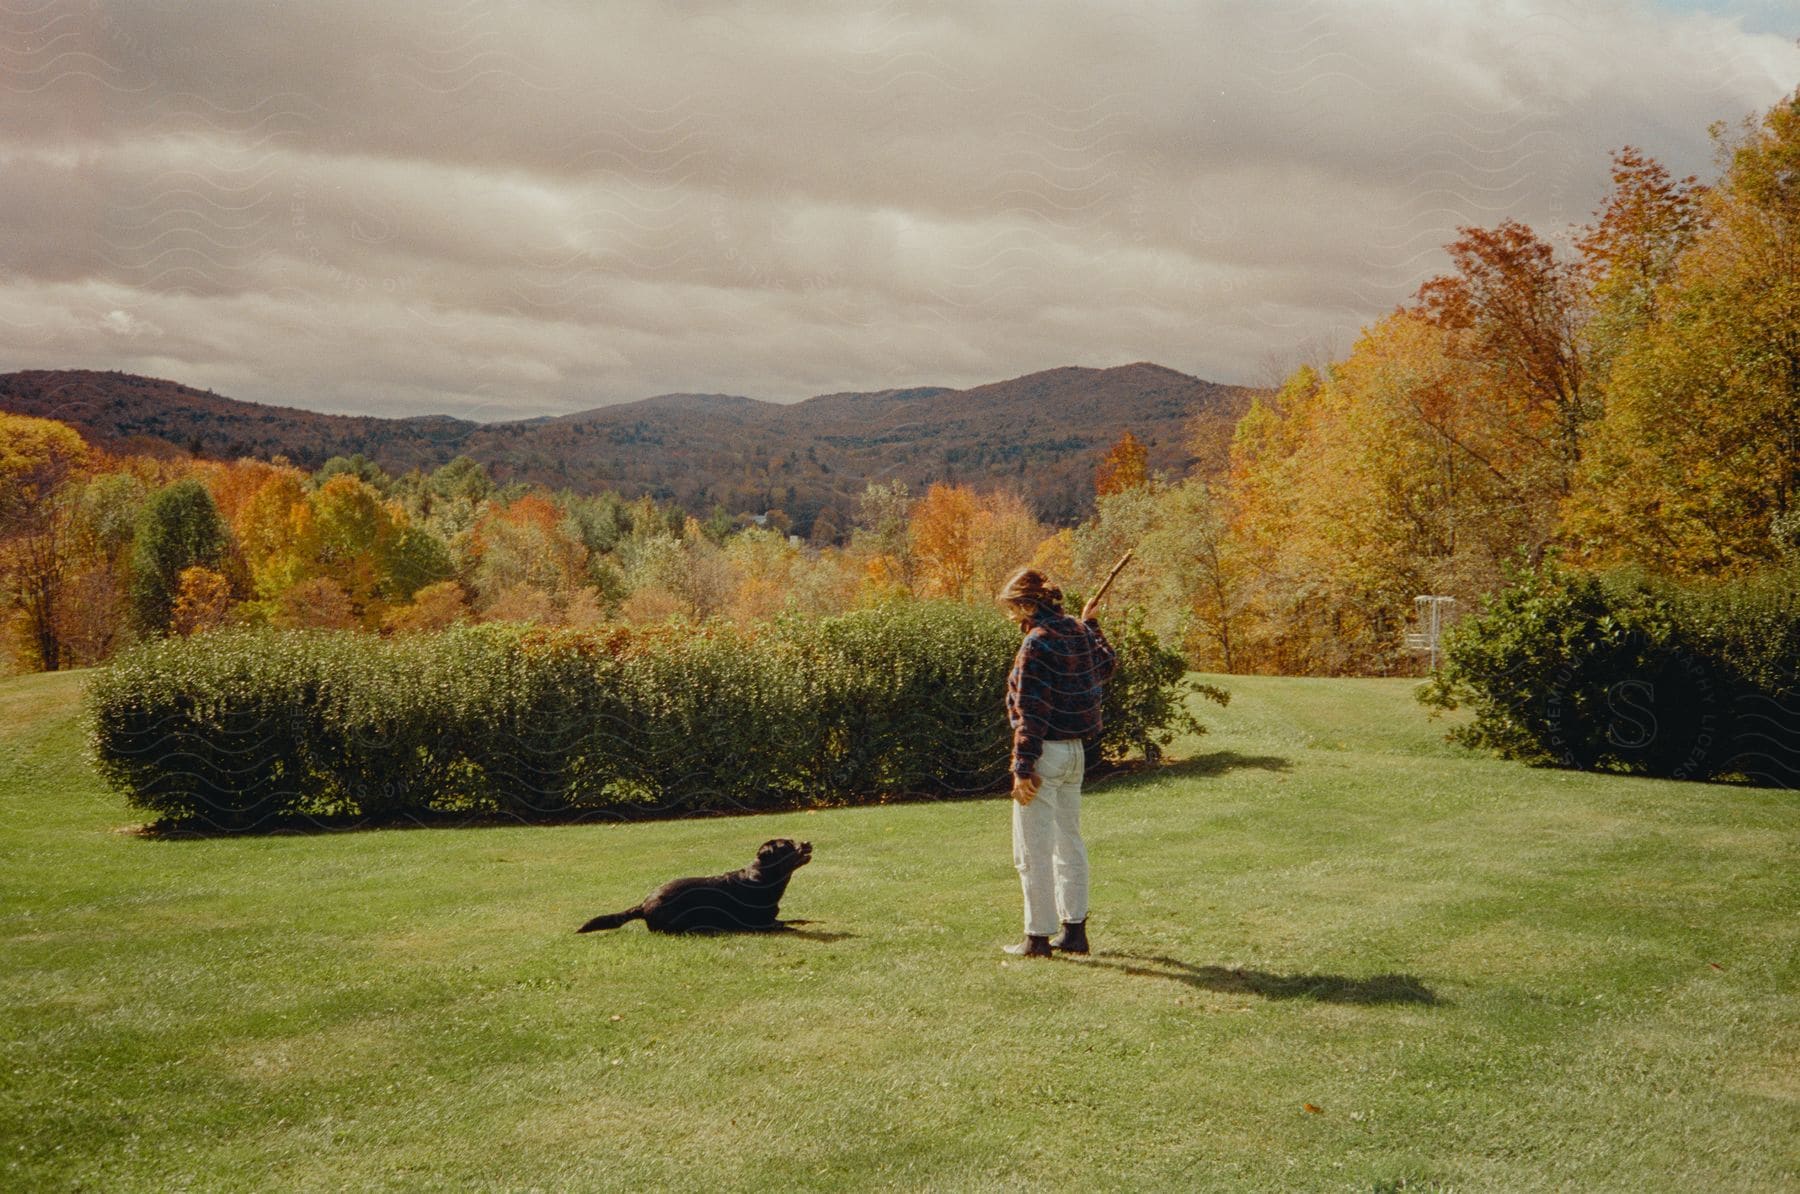 A women is playing fetch with her dog in the fall.